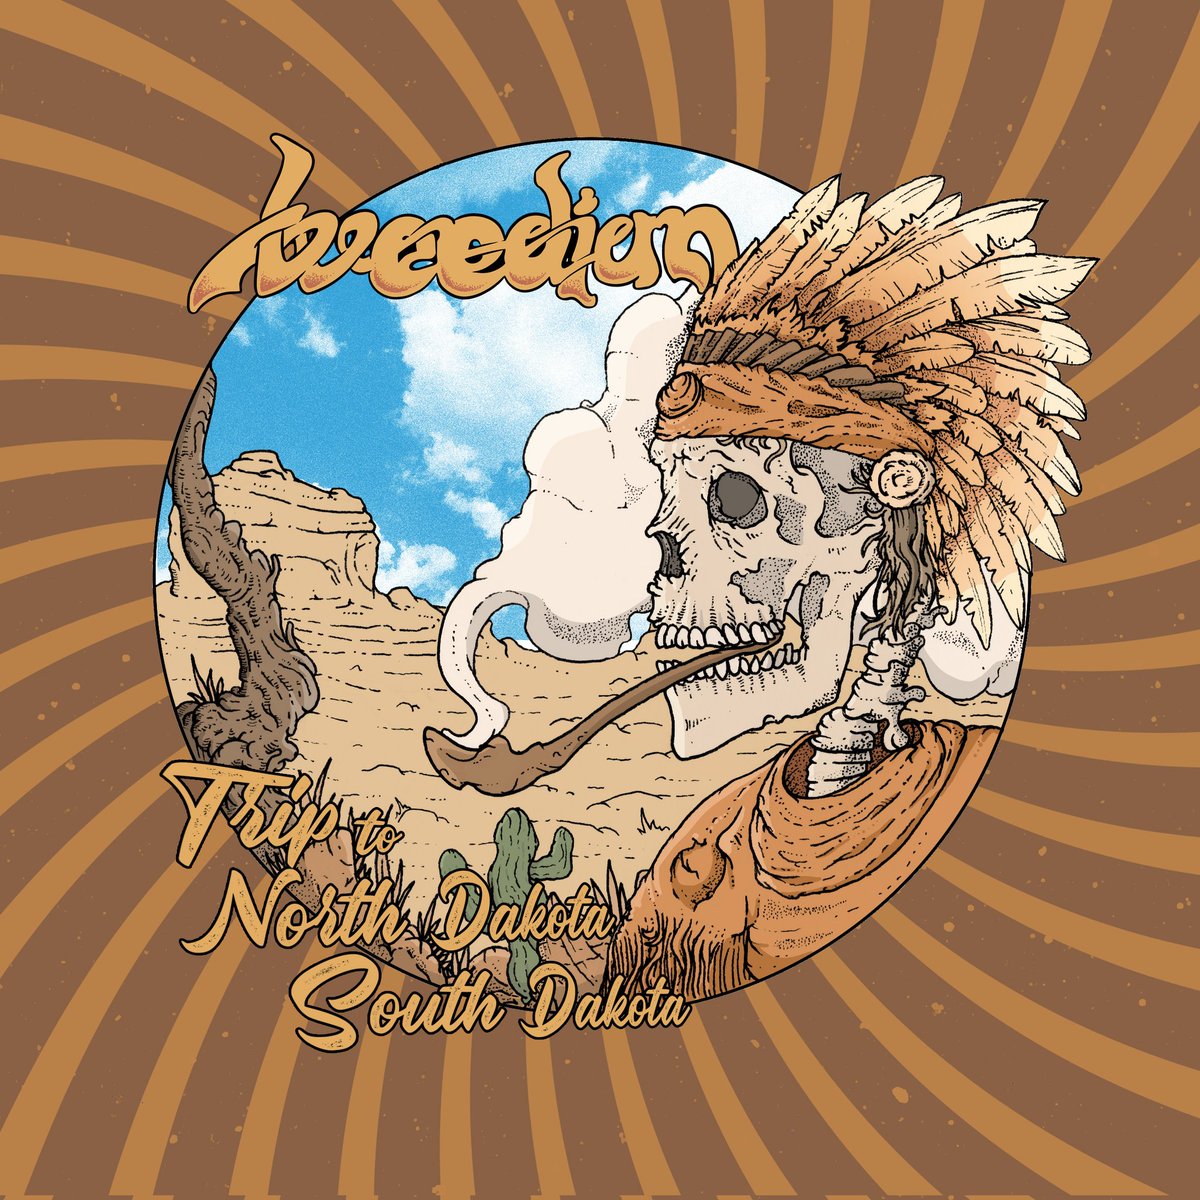 We're happy to unveil a brand-new compilation 'Trip to North Dakota & South Dakota' that includes the best of ND & SD underground scene like Egypt, Rifflord, El Supremo...and more Enjoy!!! 
weedian420.bandcamp.com/album/trip-to-…

Artwork by Gravelord Deathworks - Arts & Designs